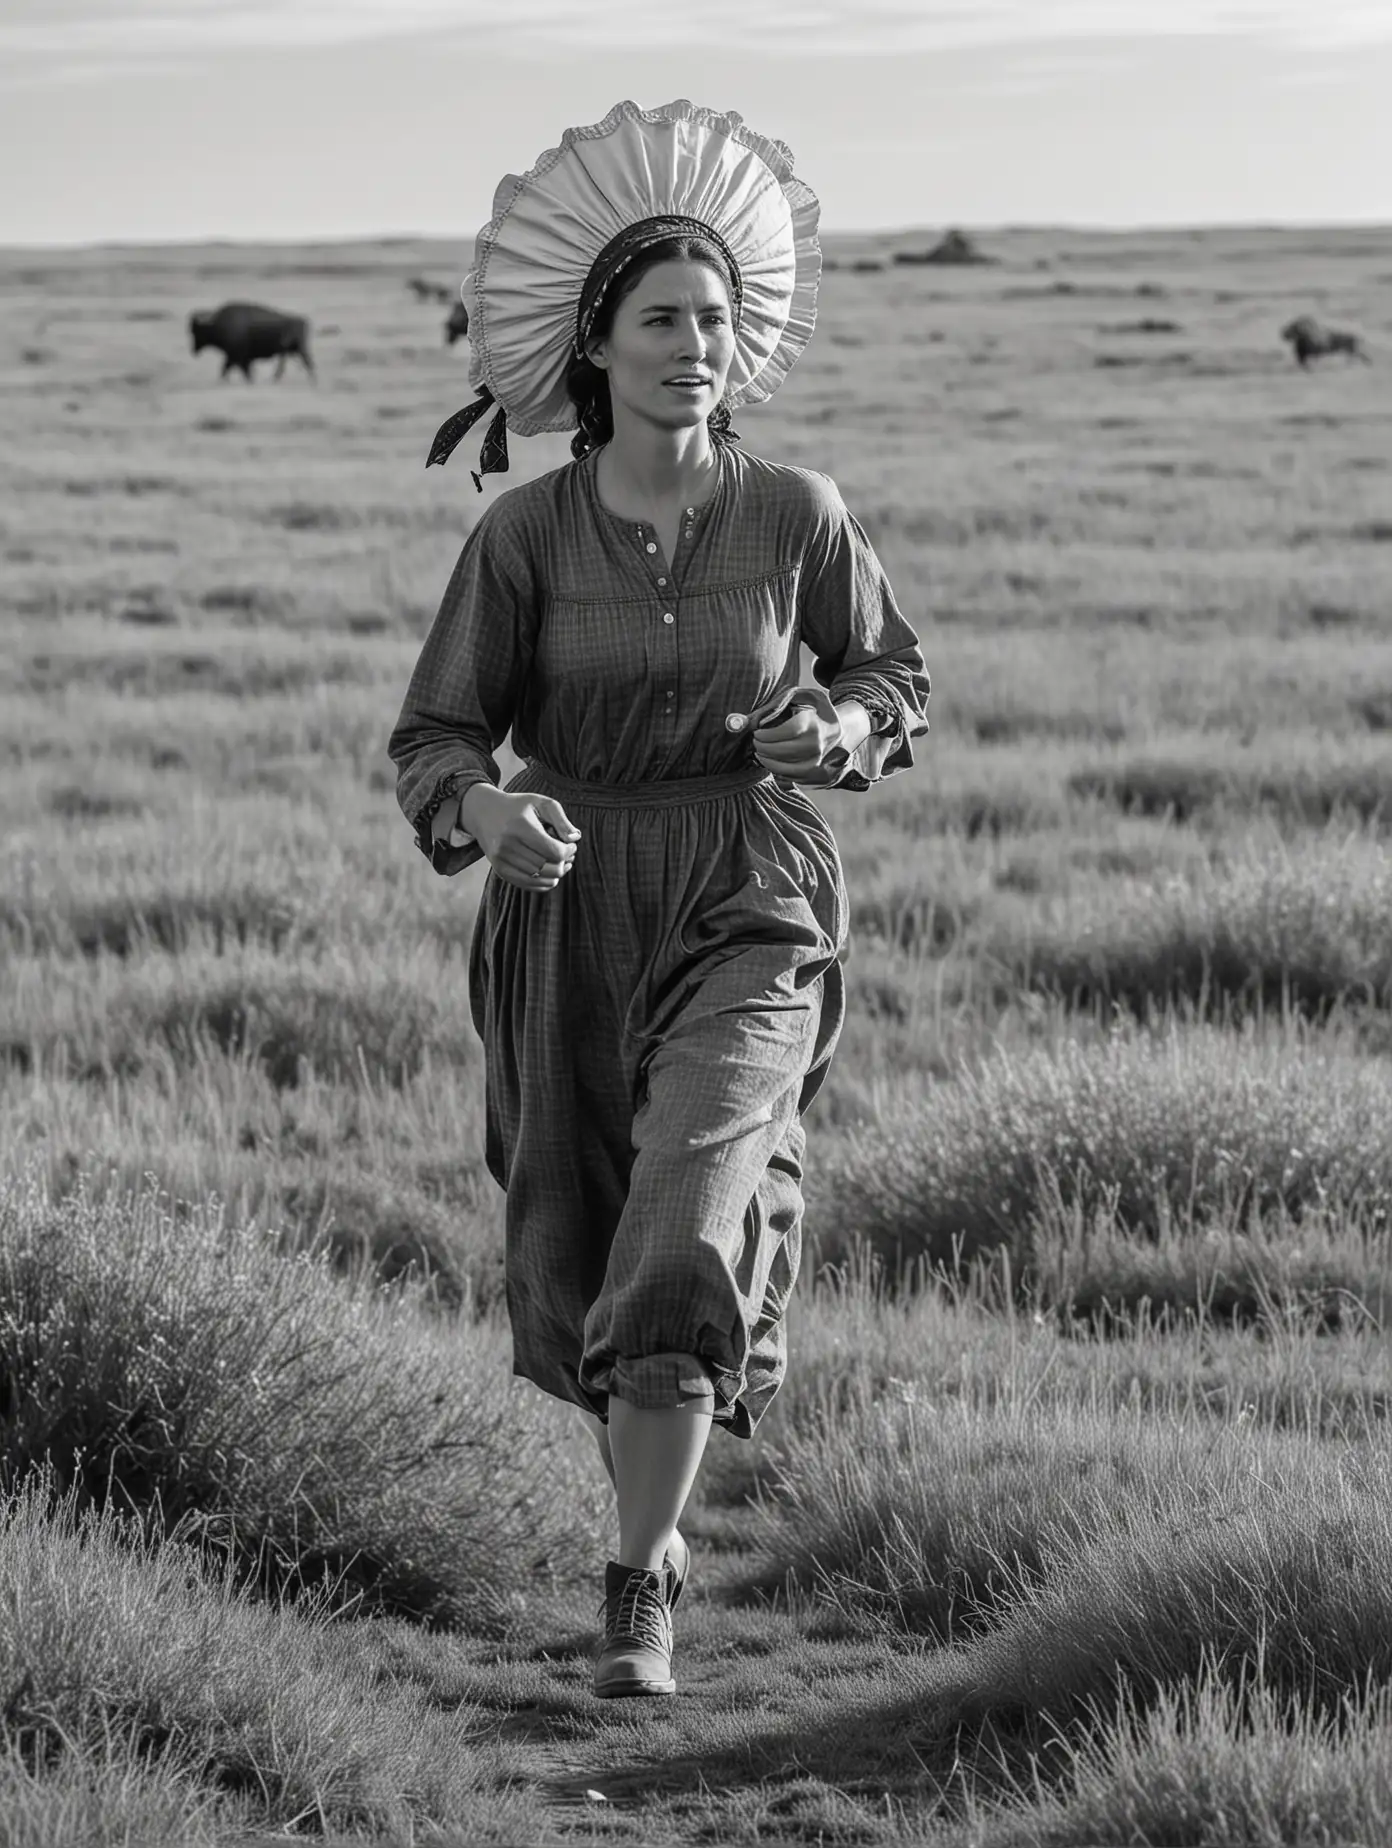 Pioneer Woman Running Across Prairie with Buffalo in Black and White